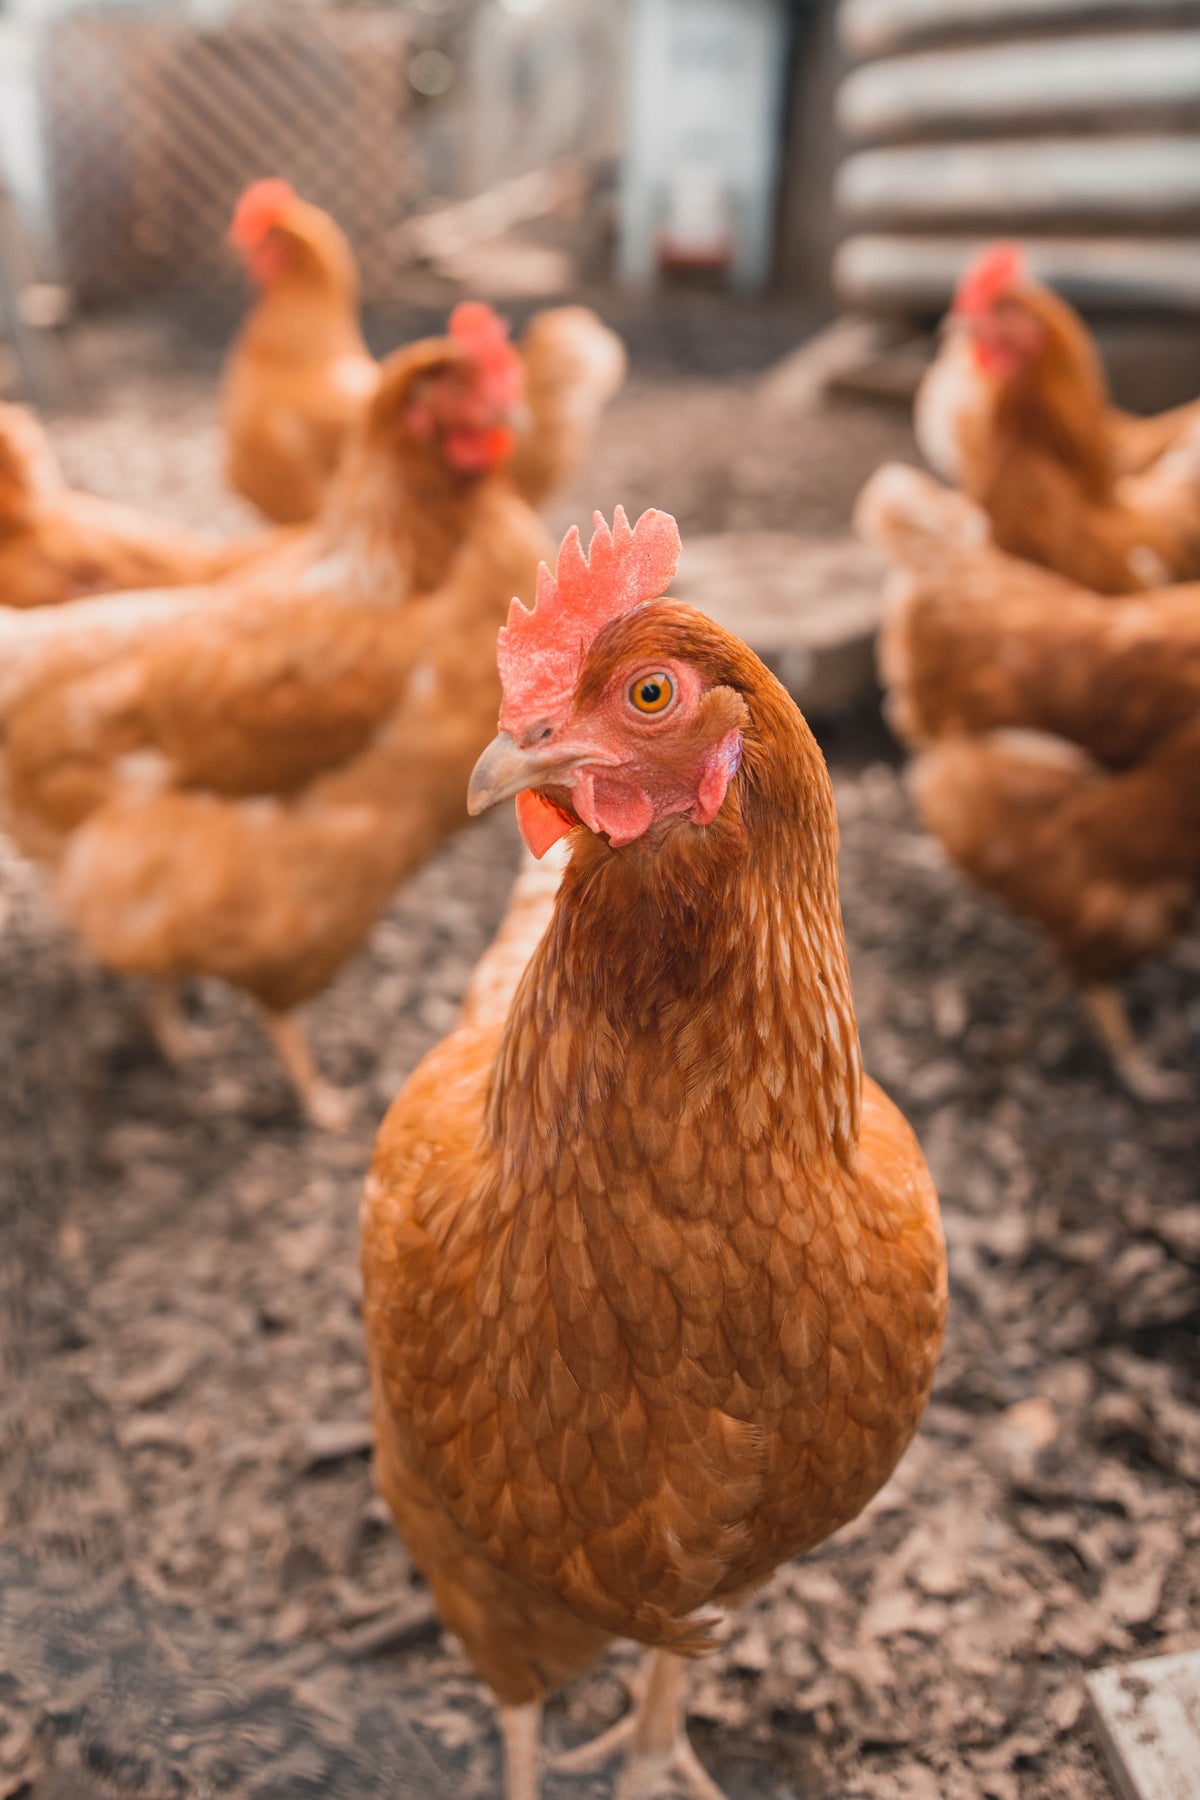 Chicken Feed: Look for Ruminant Proteins Avoid Synthetic Proteins